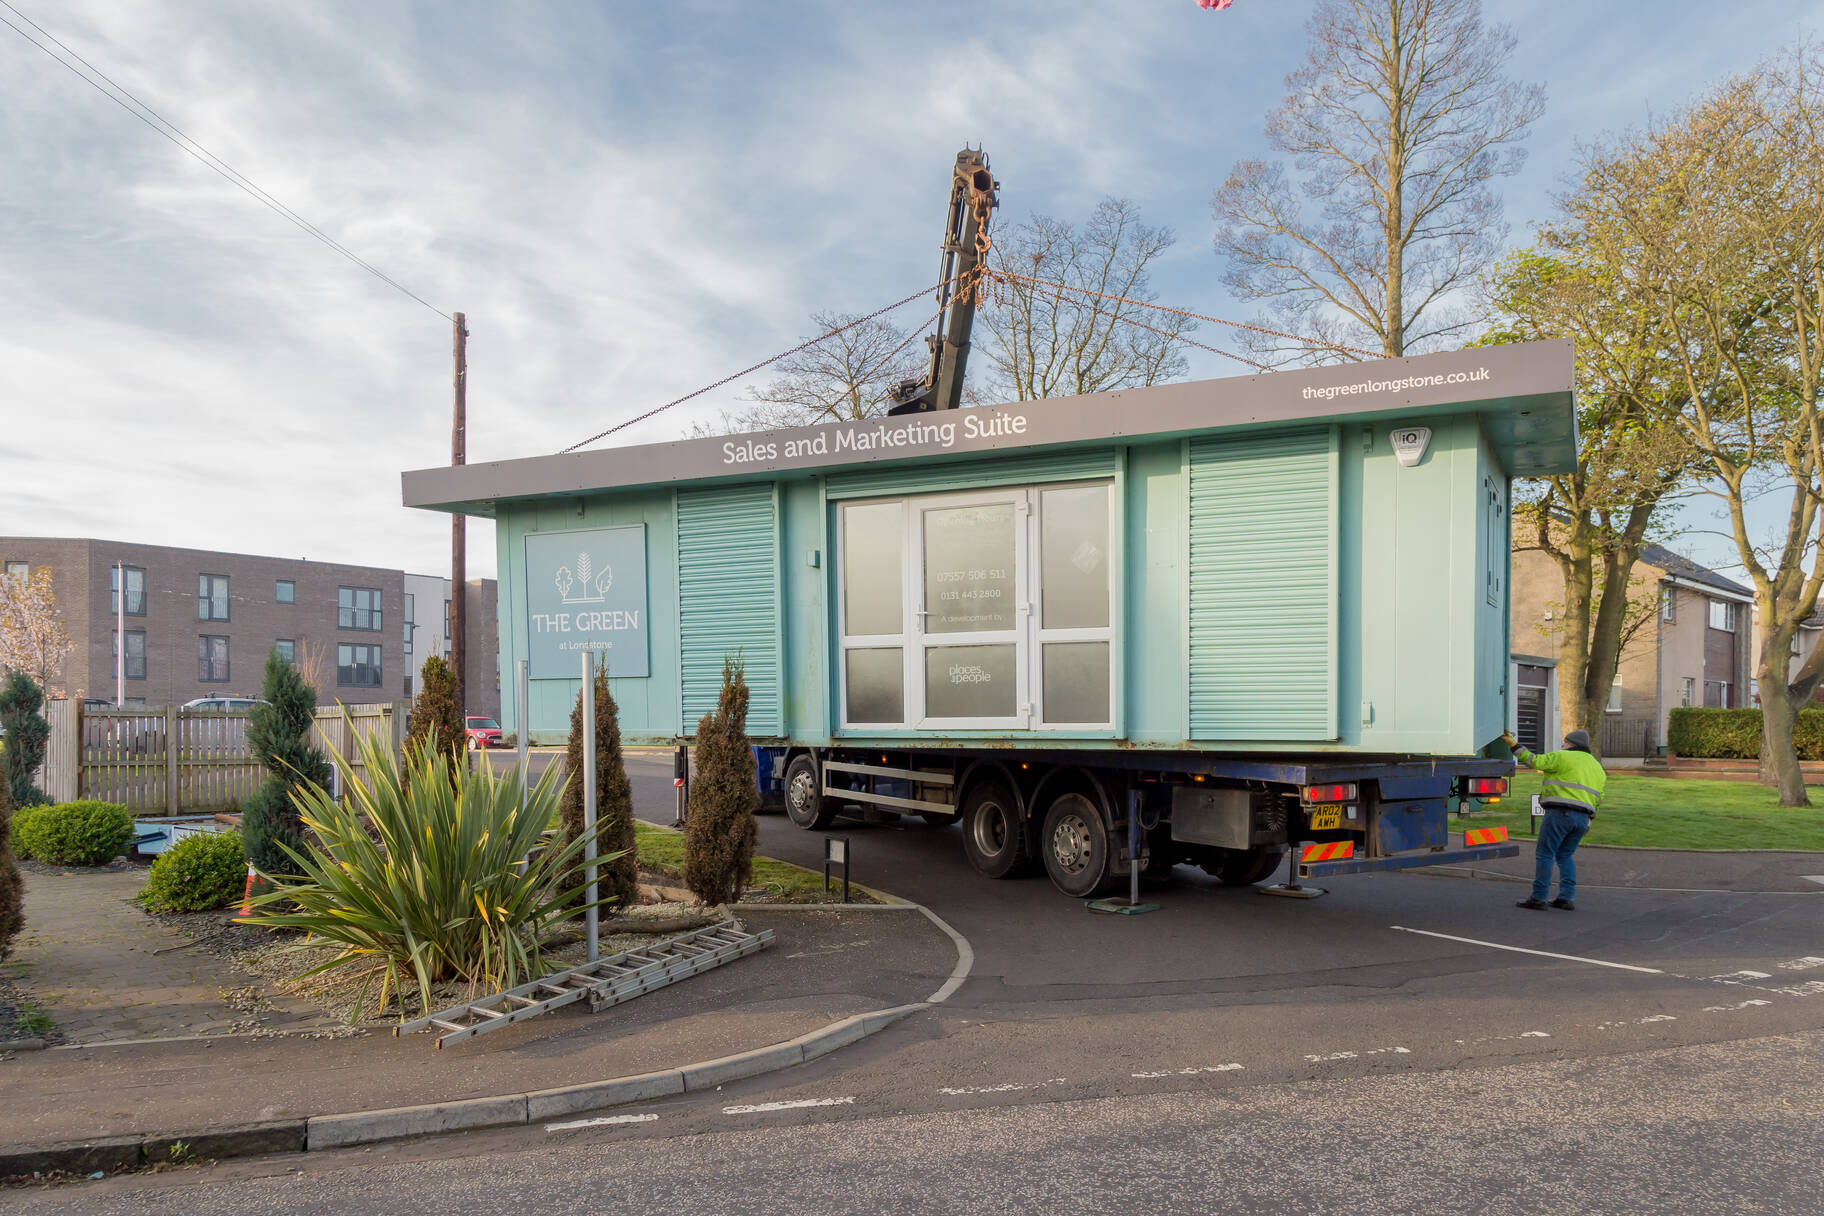 Places for People hands recycled portacabin to Edinburgh charity